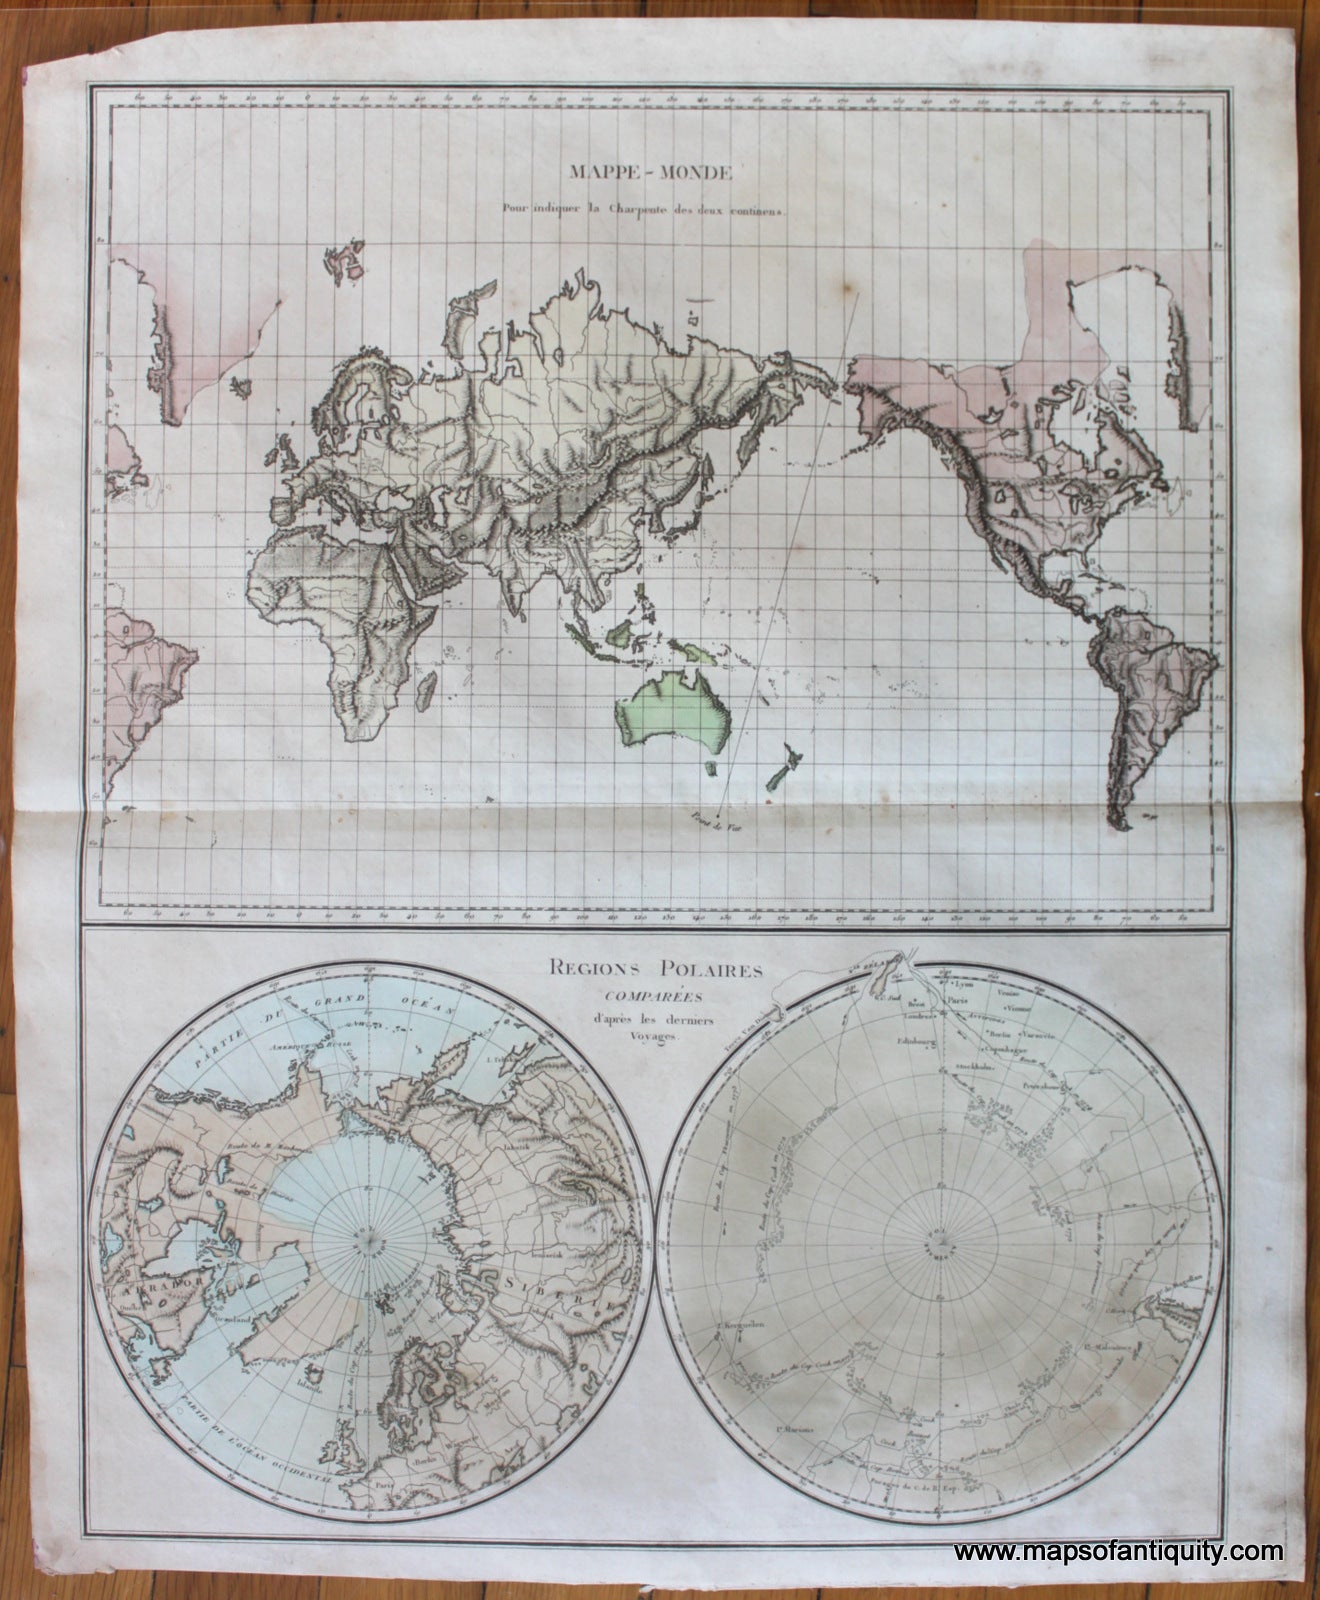 Antique-Map-World-Polar-Regions-North-South-Poles-Mappe-Monde-Polaire-comparee-1804-Poirson-1800s-19th-century-Maps-of-Antiquity